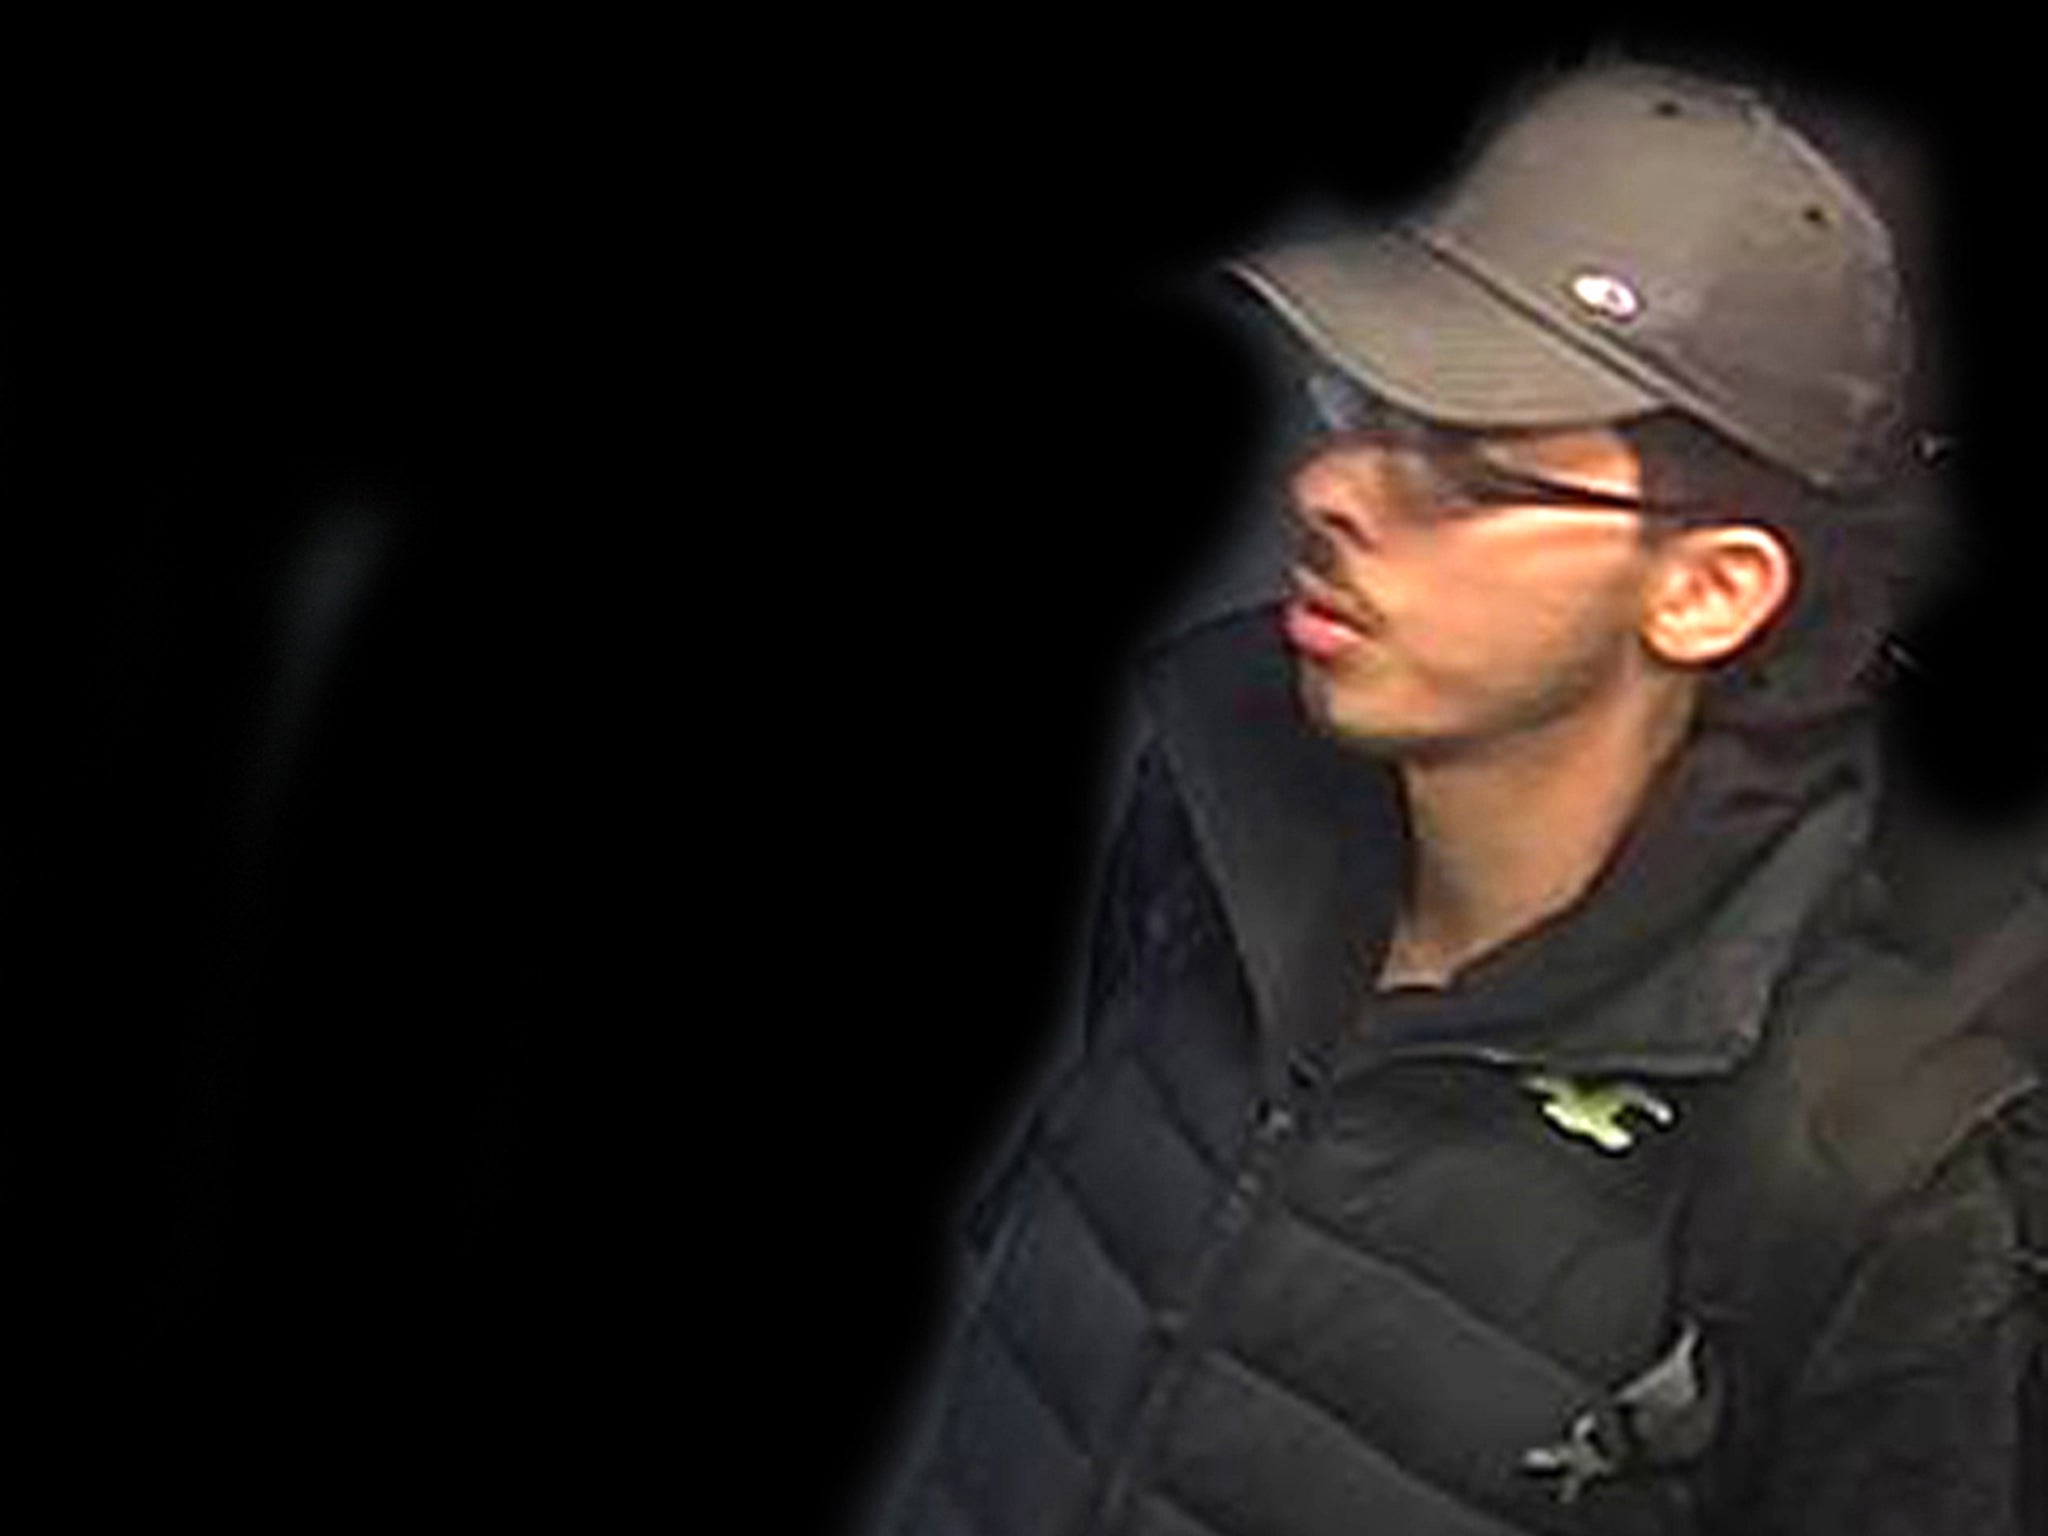 CCTV photo of Salman Abedi, issued by Greater Manchester Police, on the night of the terror attacks